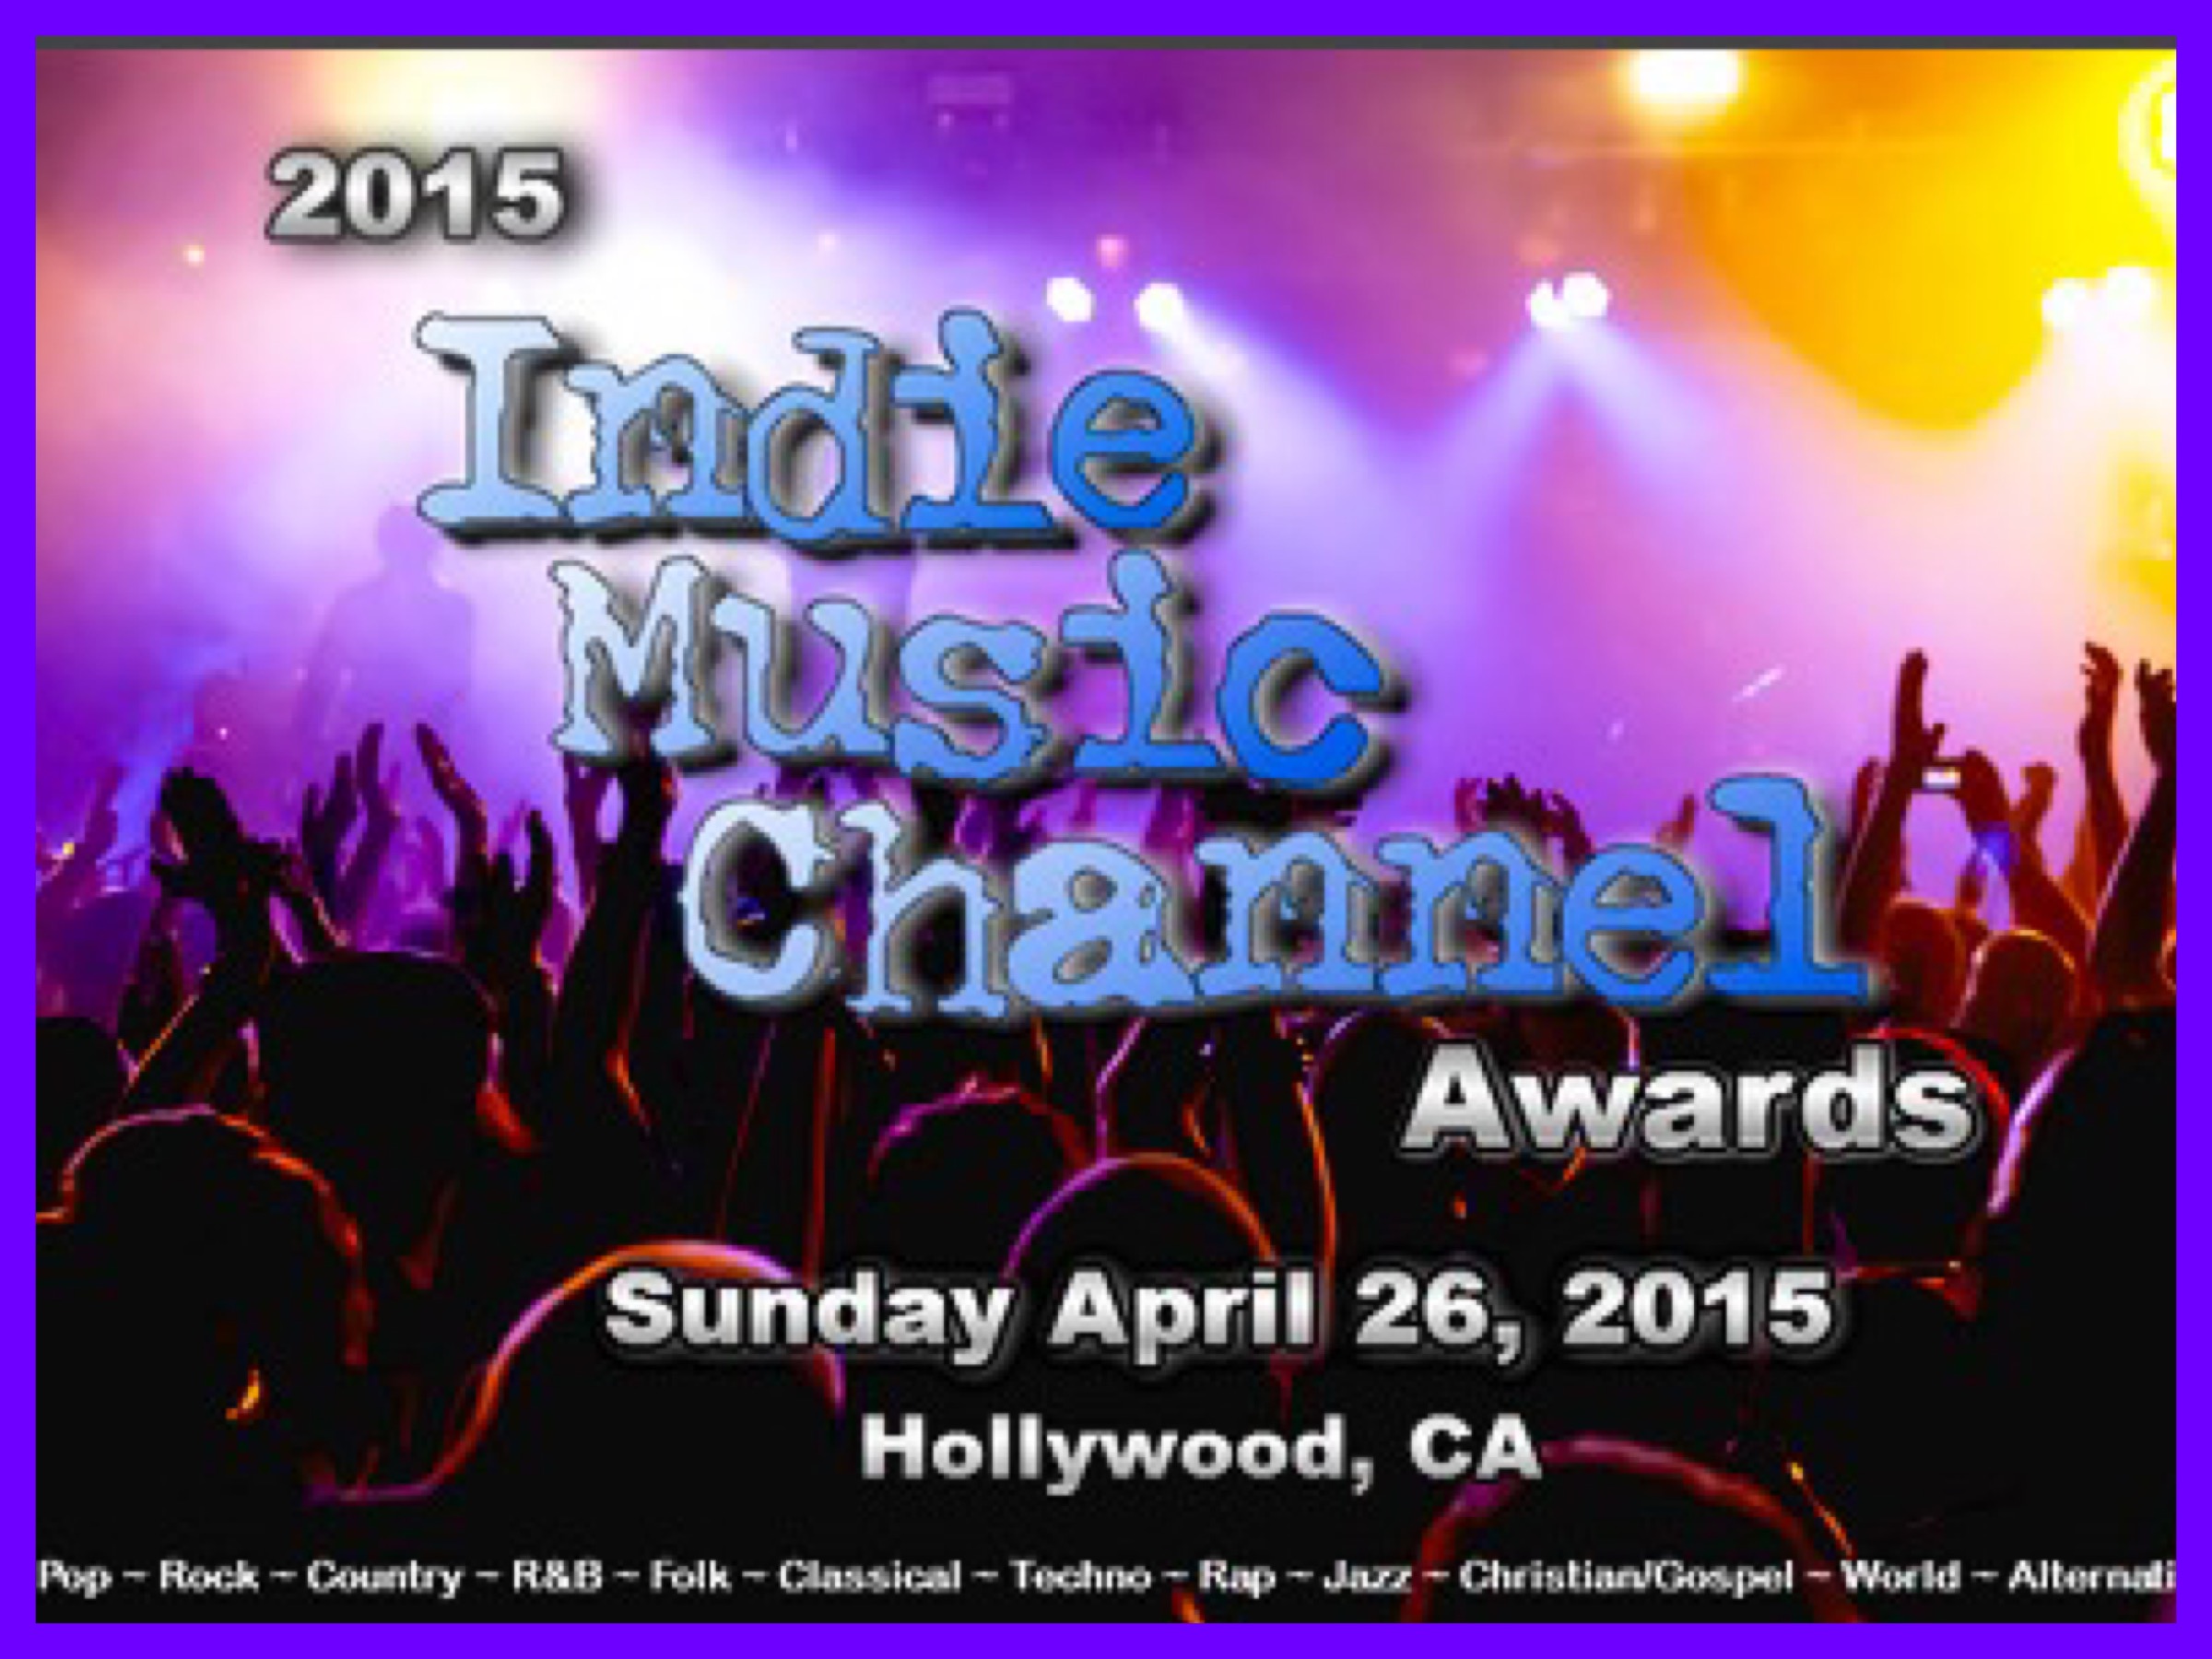 2015 Indie Music Channel Awards in LA, USA, where Rearna Constantine wins "Best Alternative Female Artist" for her song "First Of All"  Produced by Domenic Pernasilici alongside Rearna Constantine